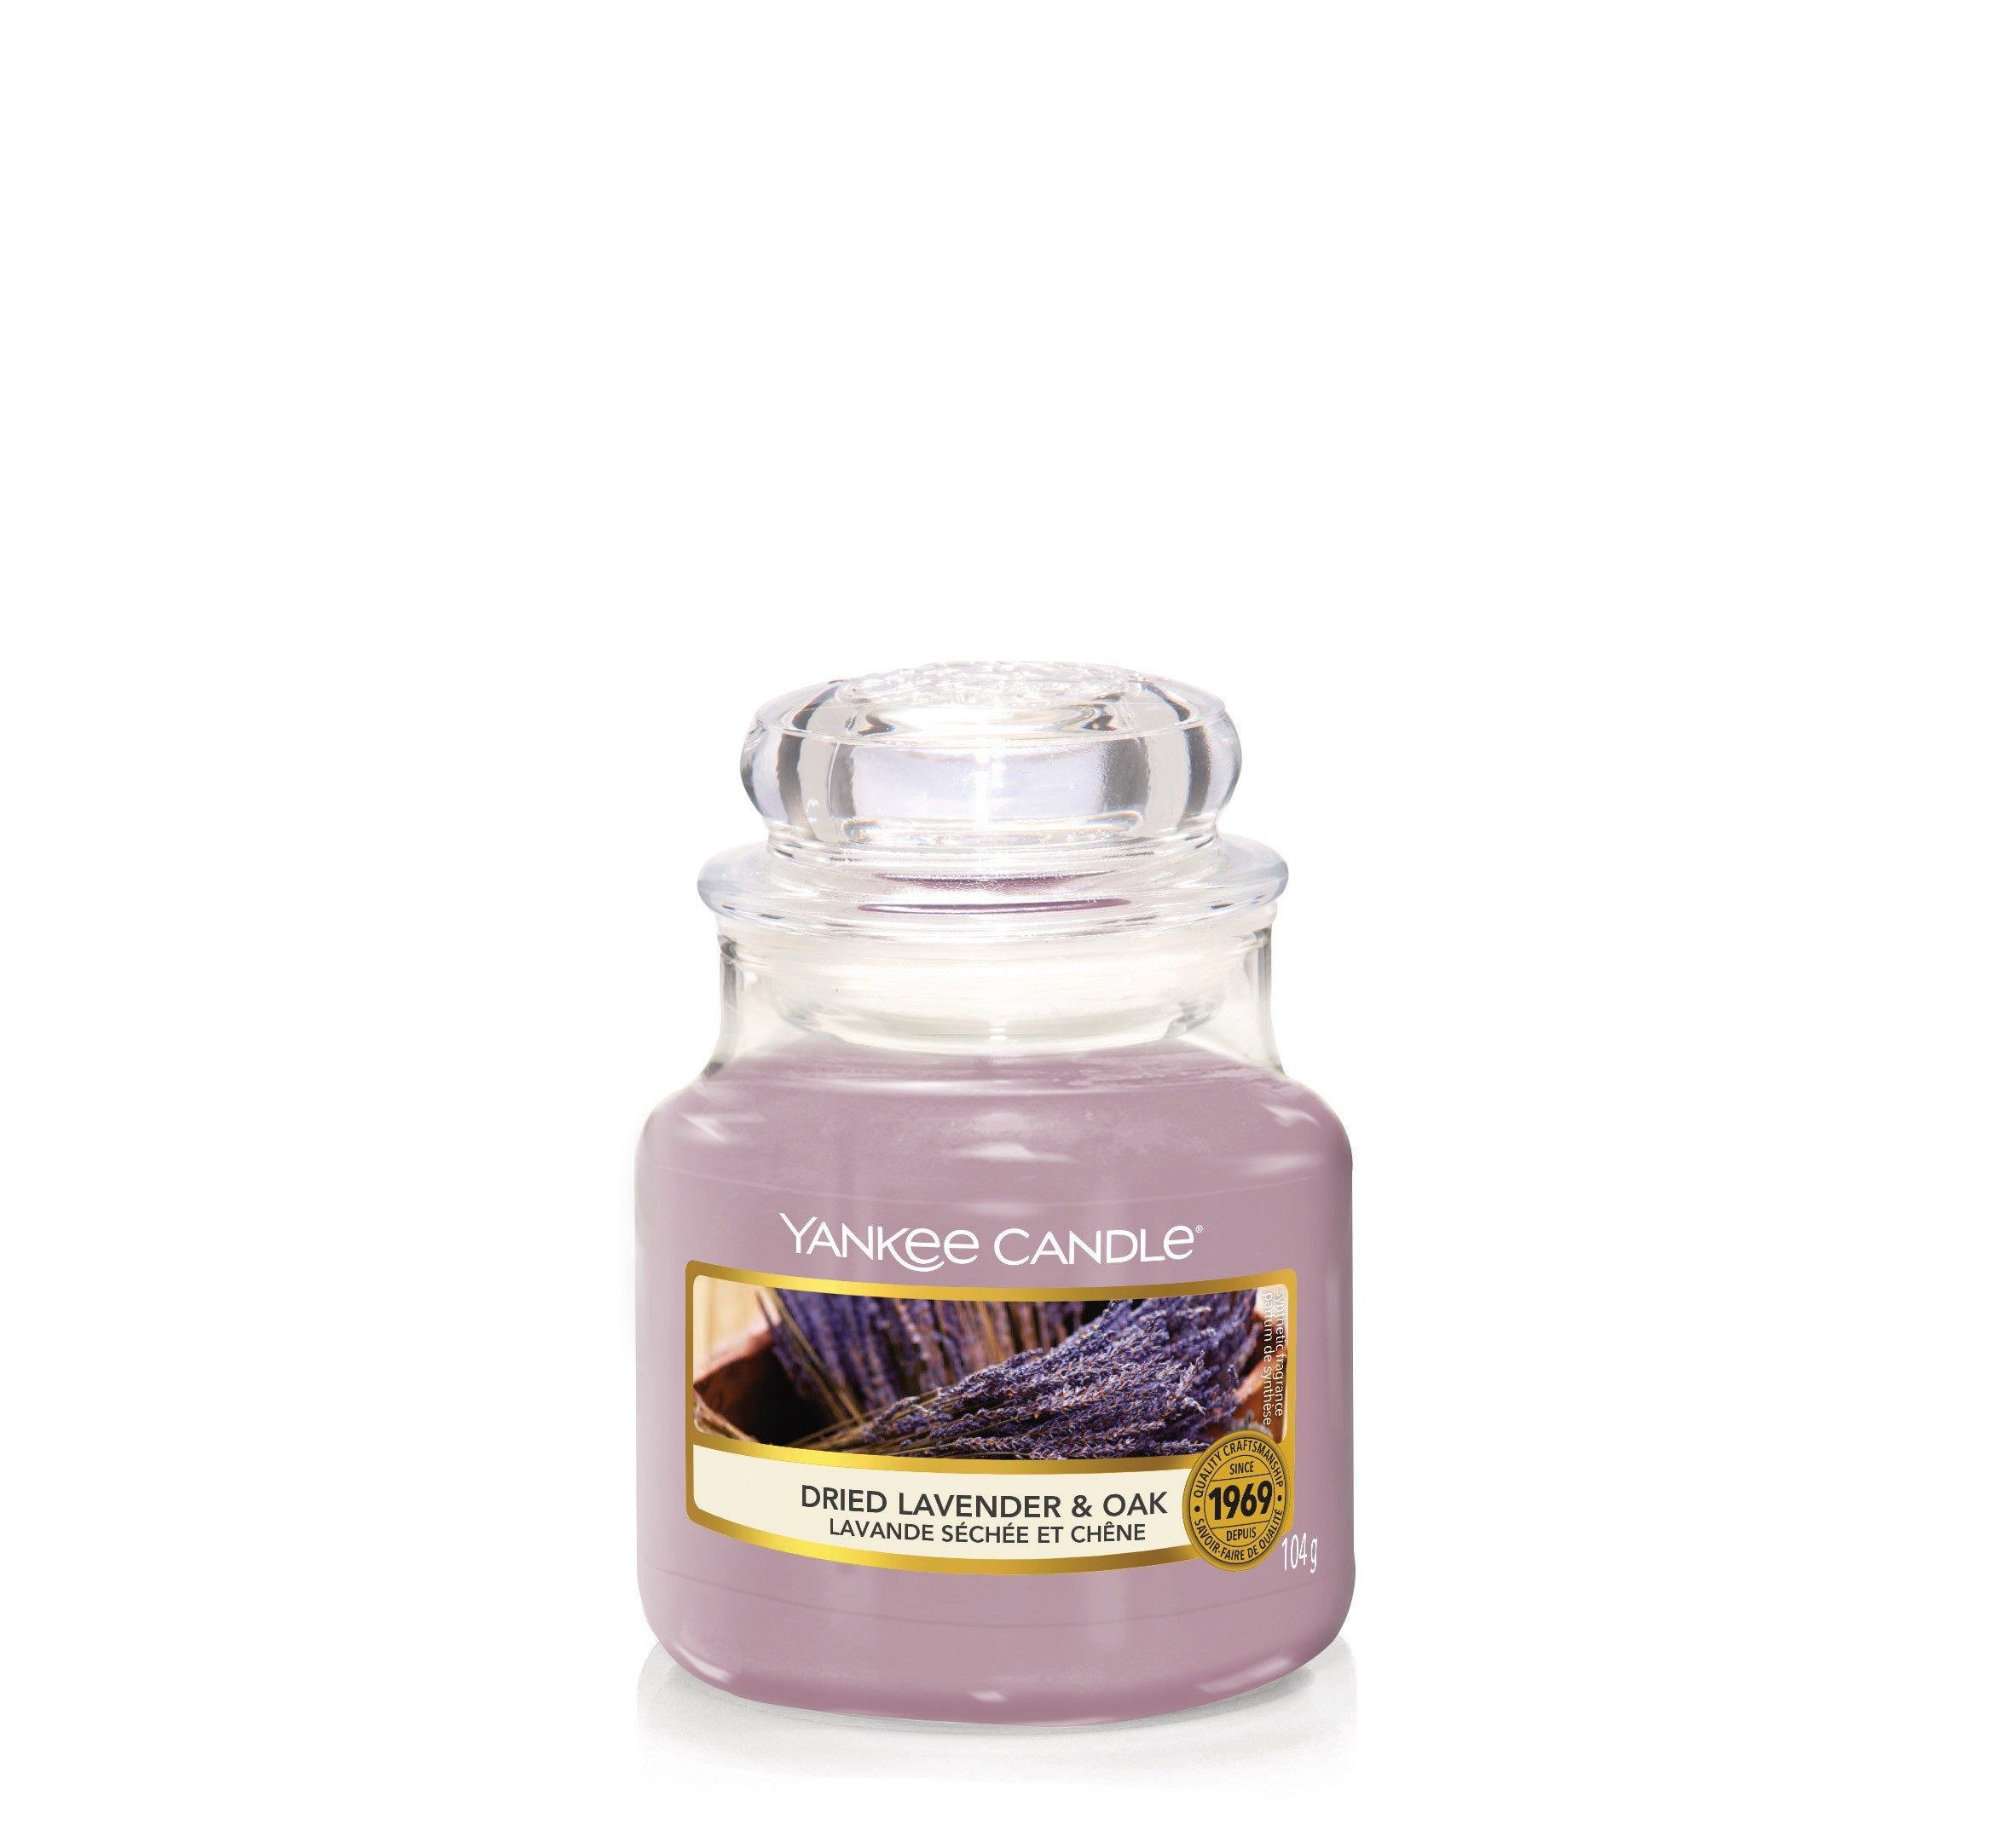 DRIED LAVENDER & OAK -Yankee Candle- Giara Piccola – Candle With Care